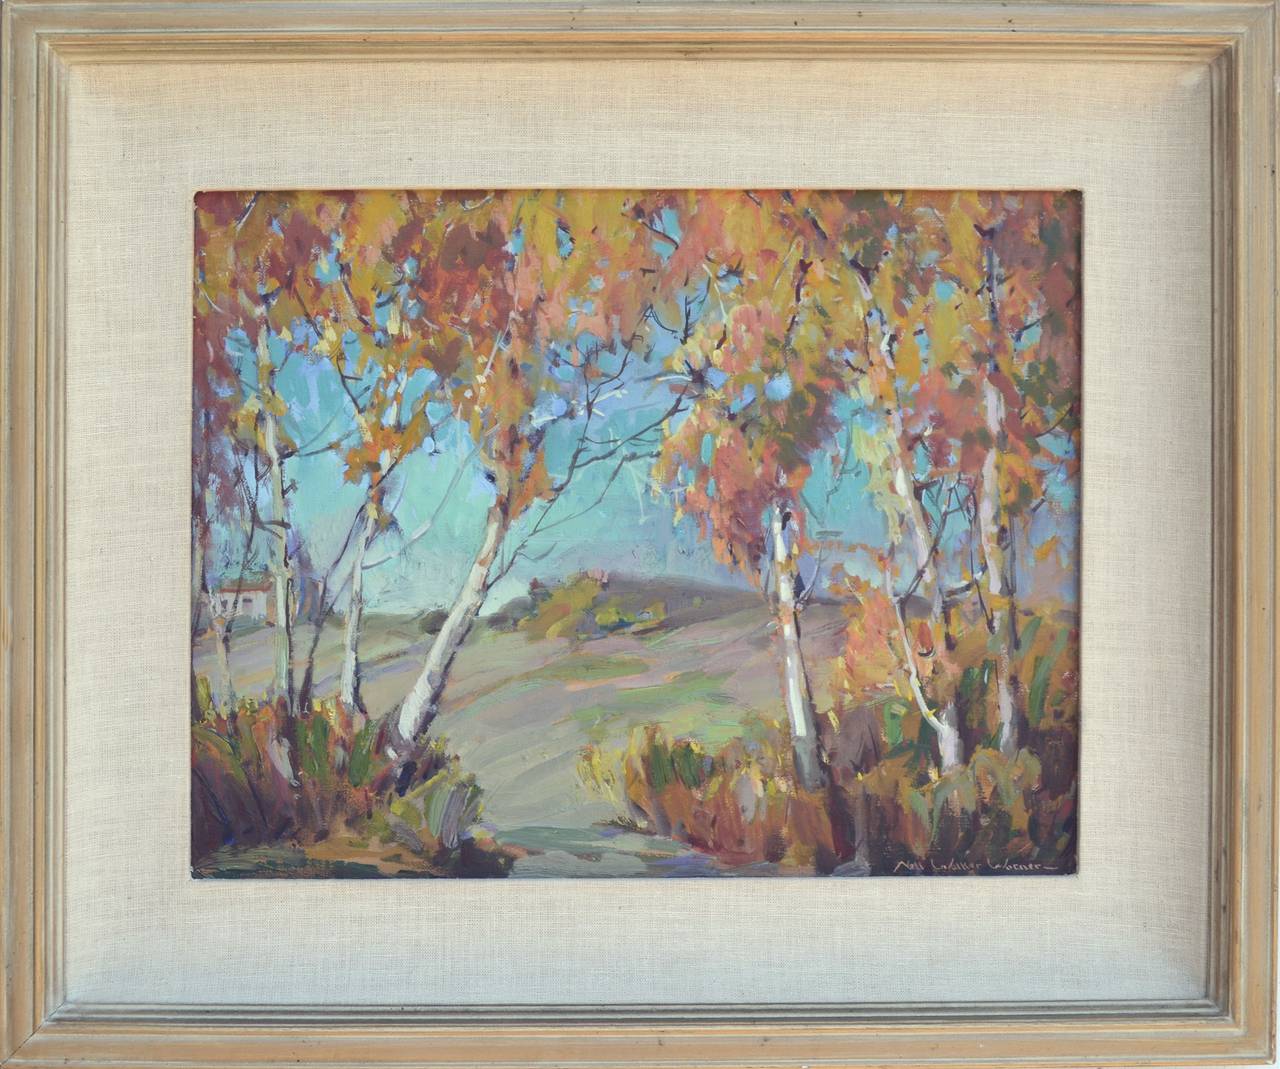 Nell Walker Warner Landscape Painting - Mid Century Sycamore Canyon, Carmel Valley Landscape with Trees